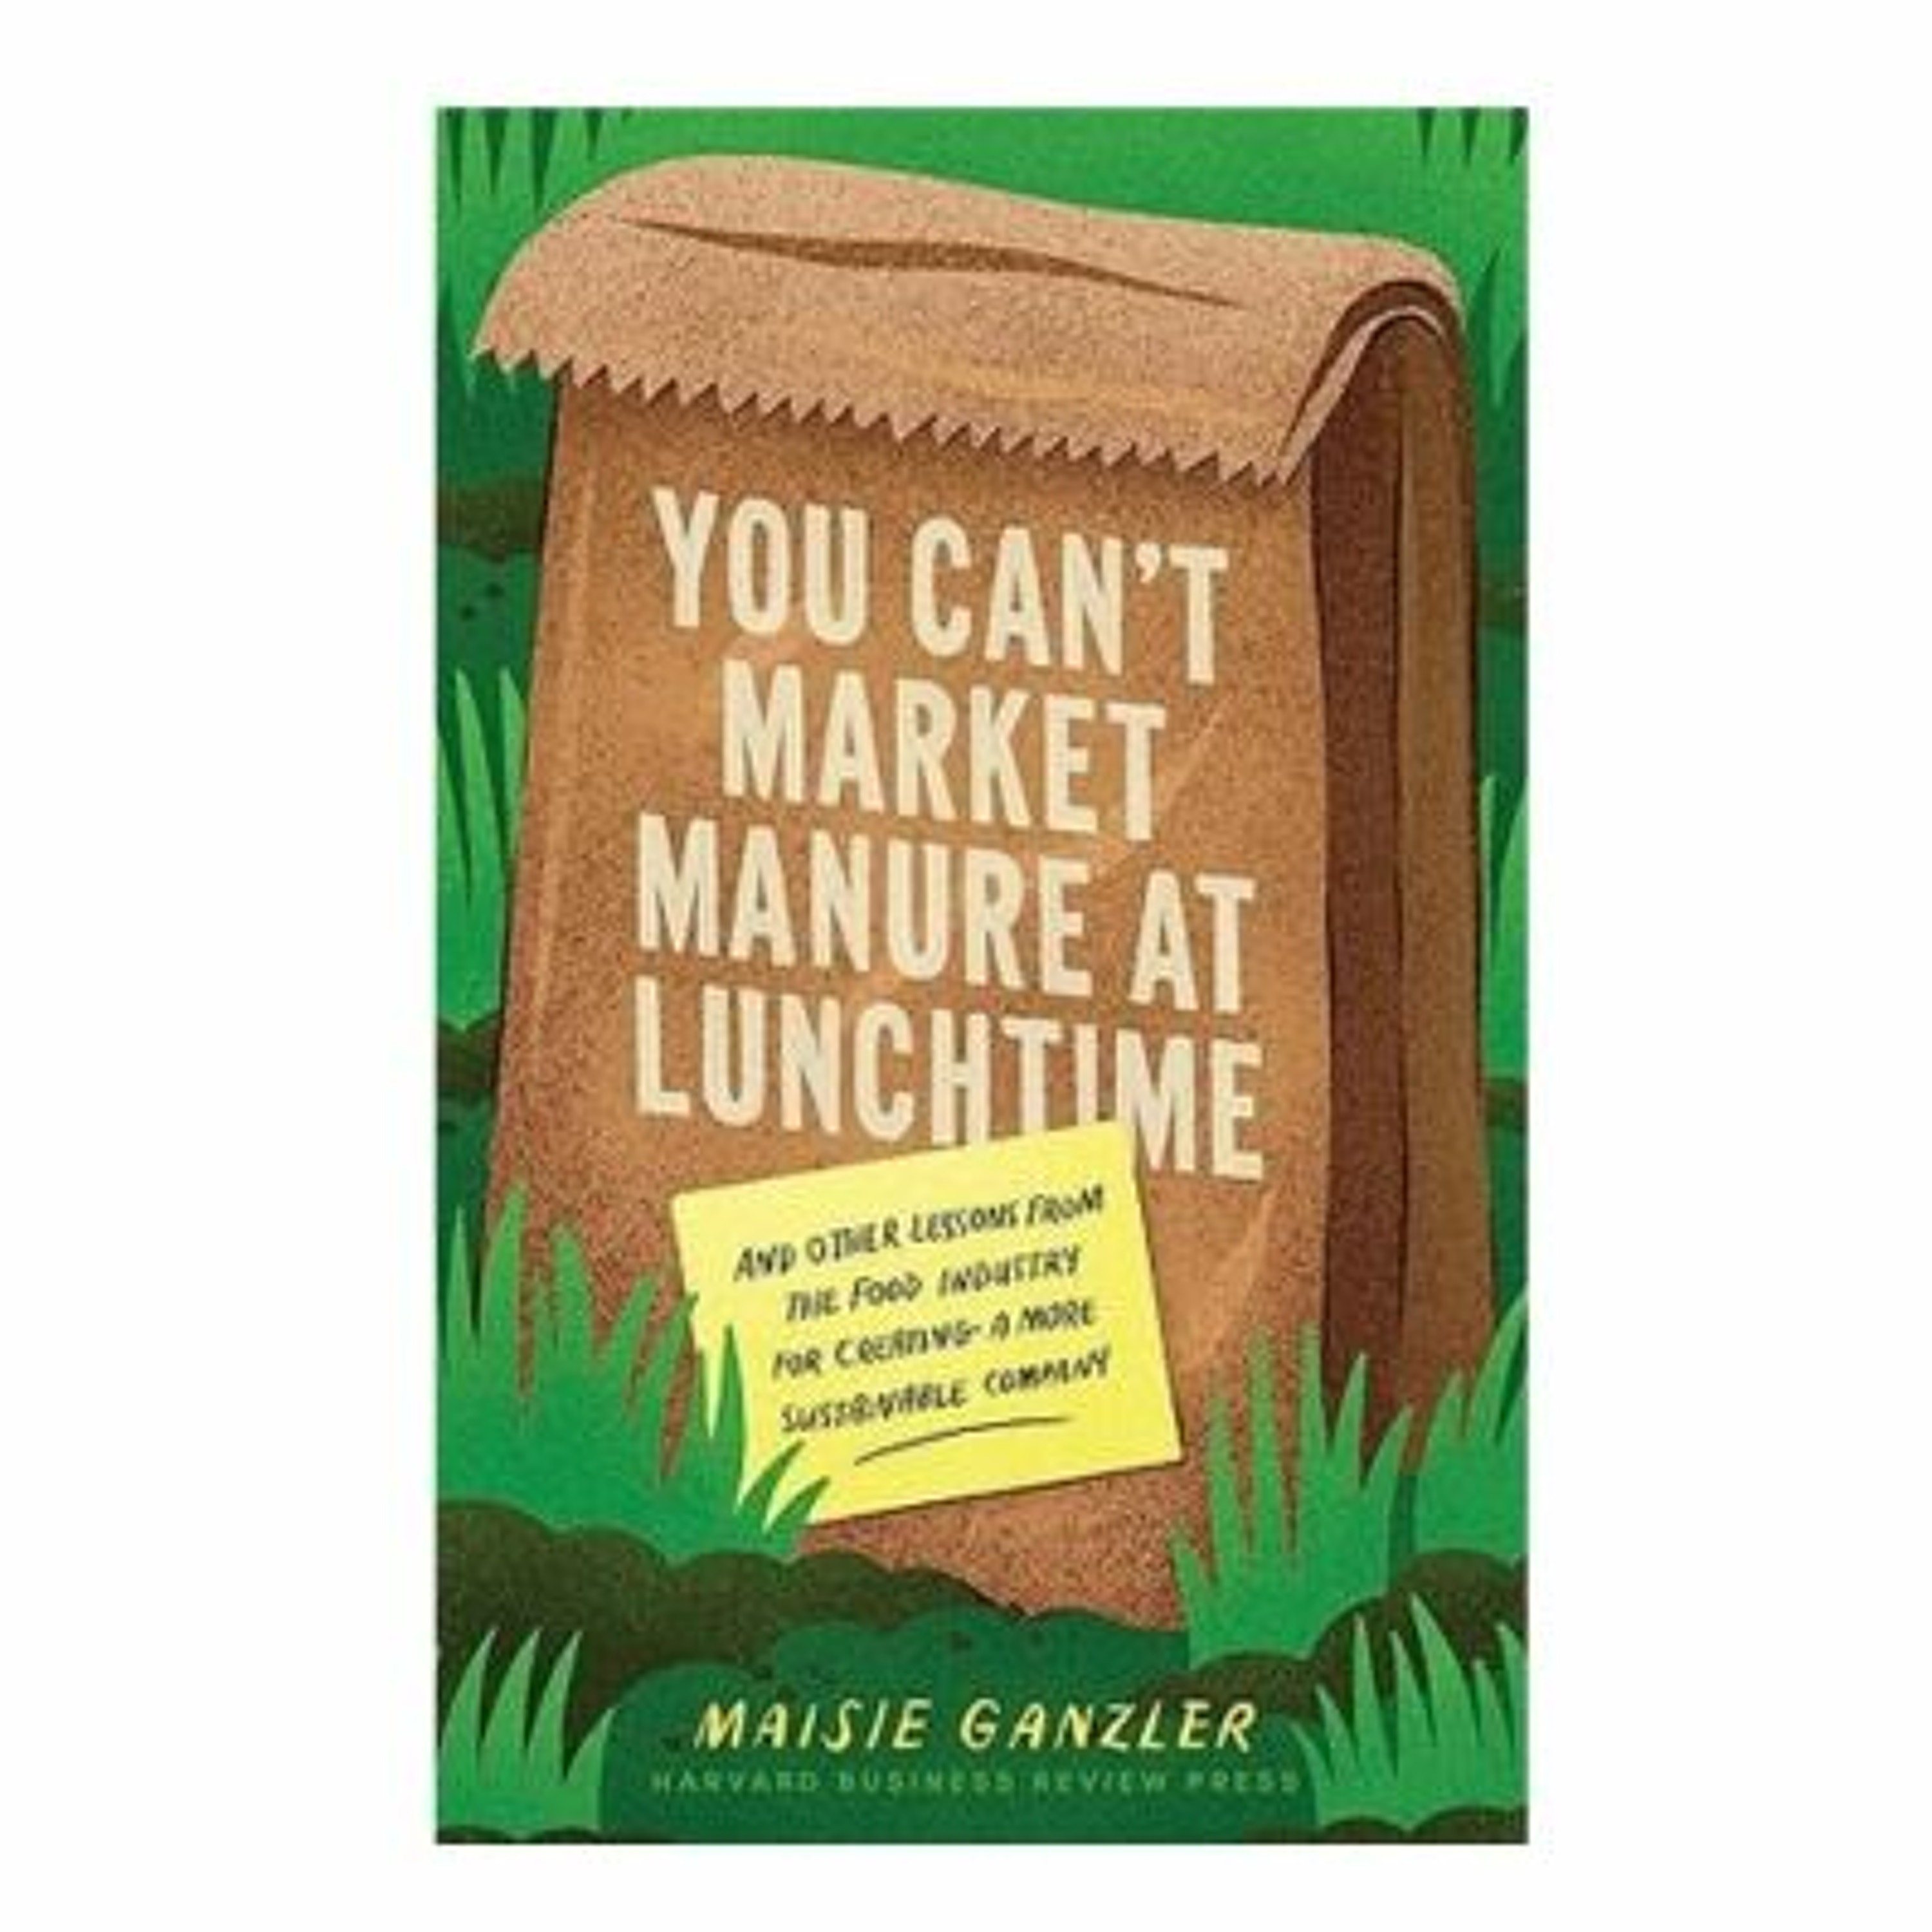 Podcast 1099: You Can't Market Manure at Lunchtime with Maisie Ganzler